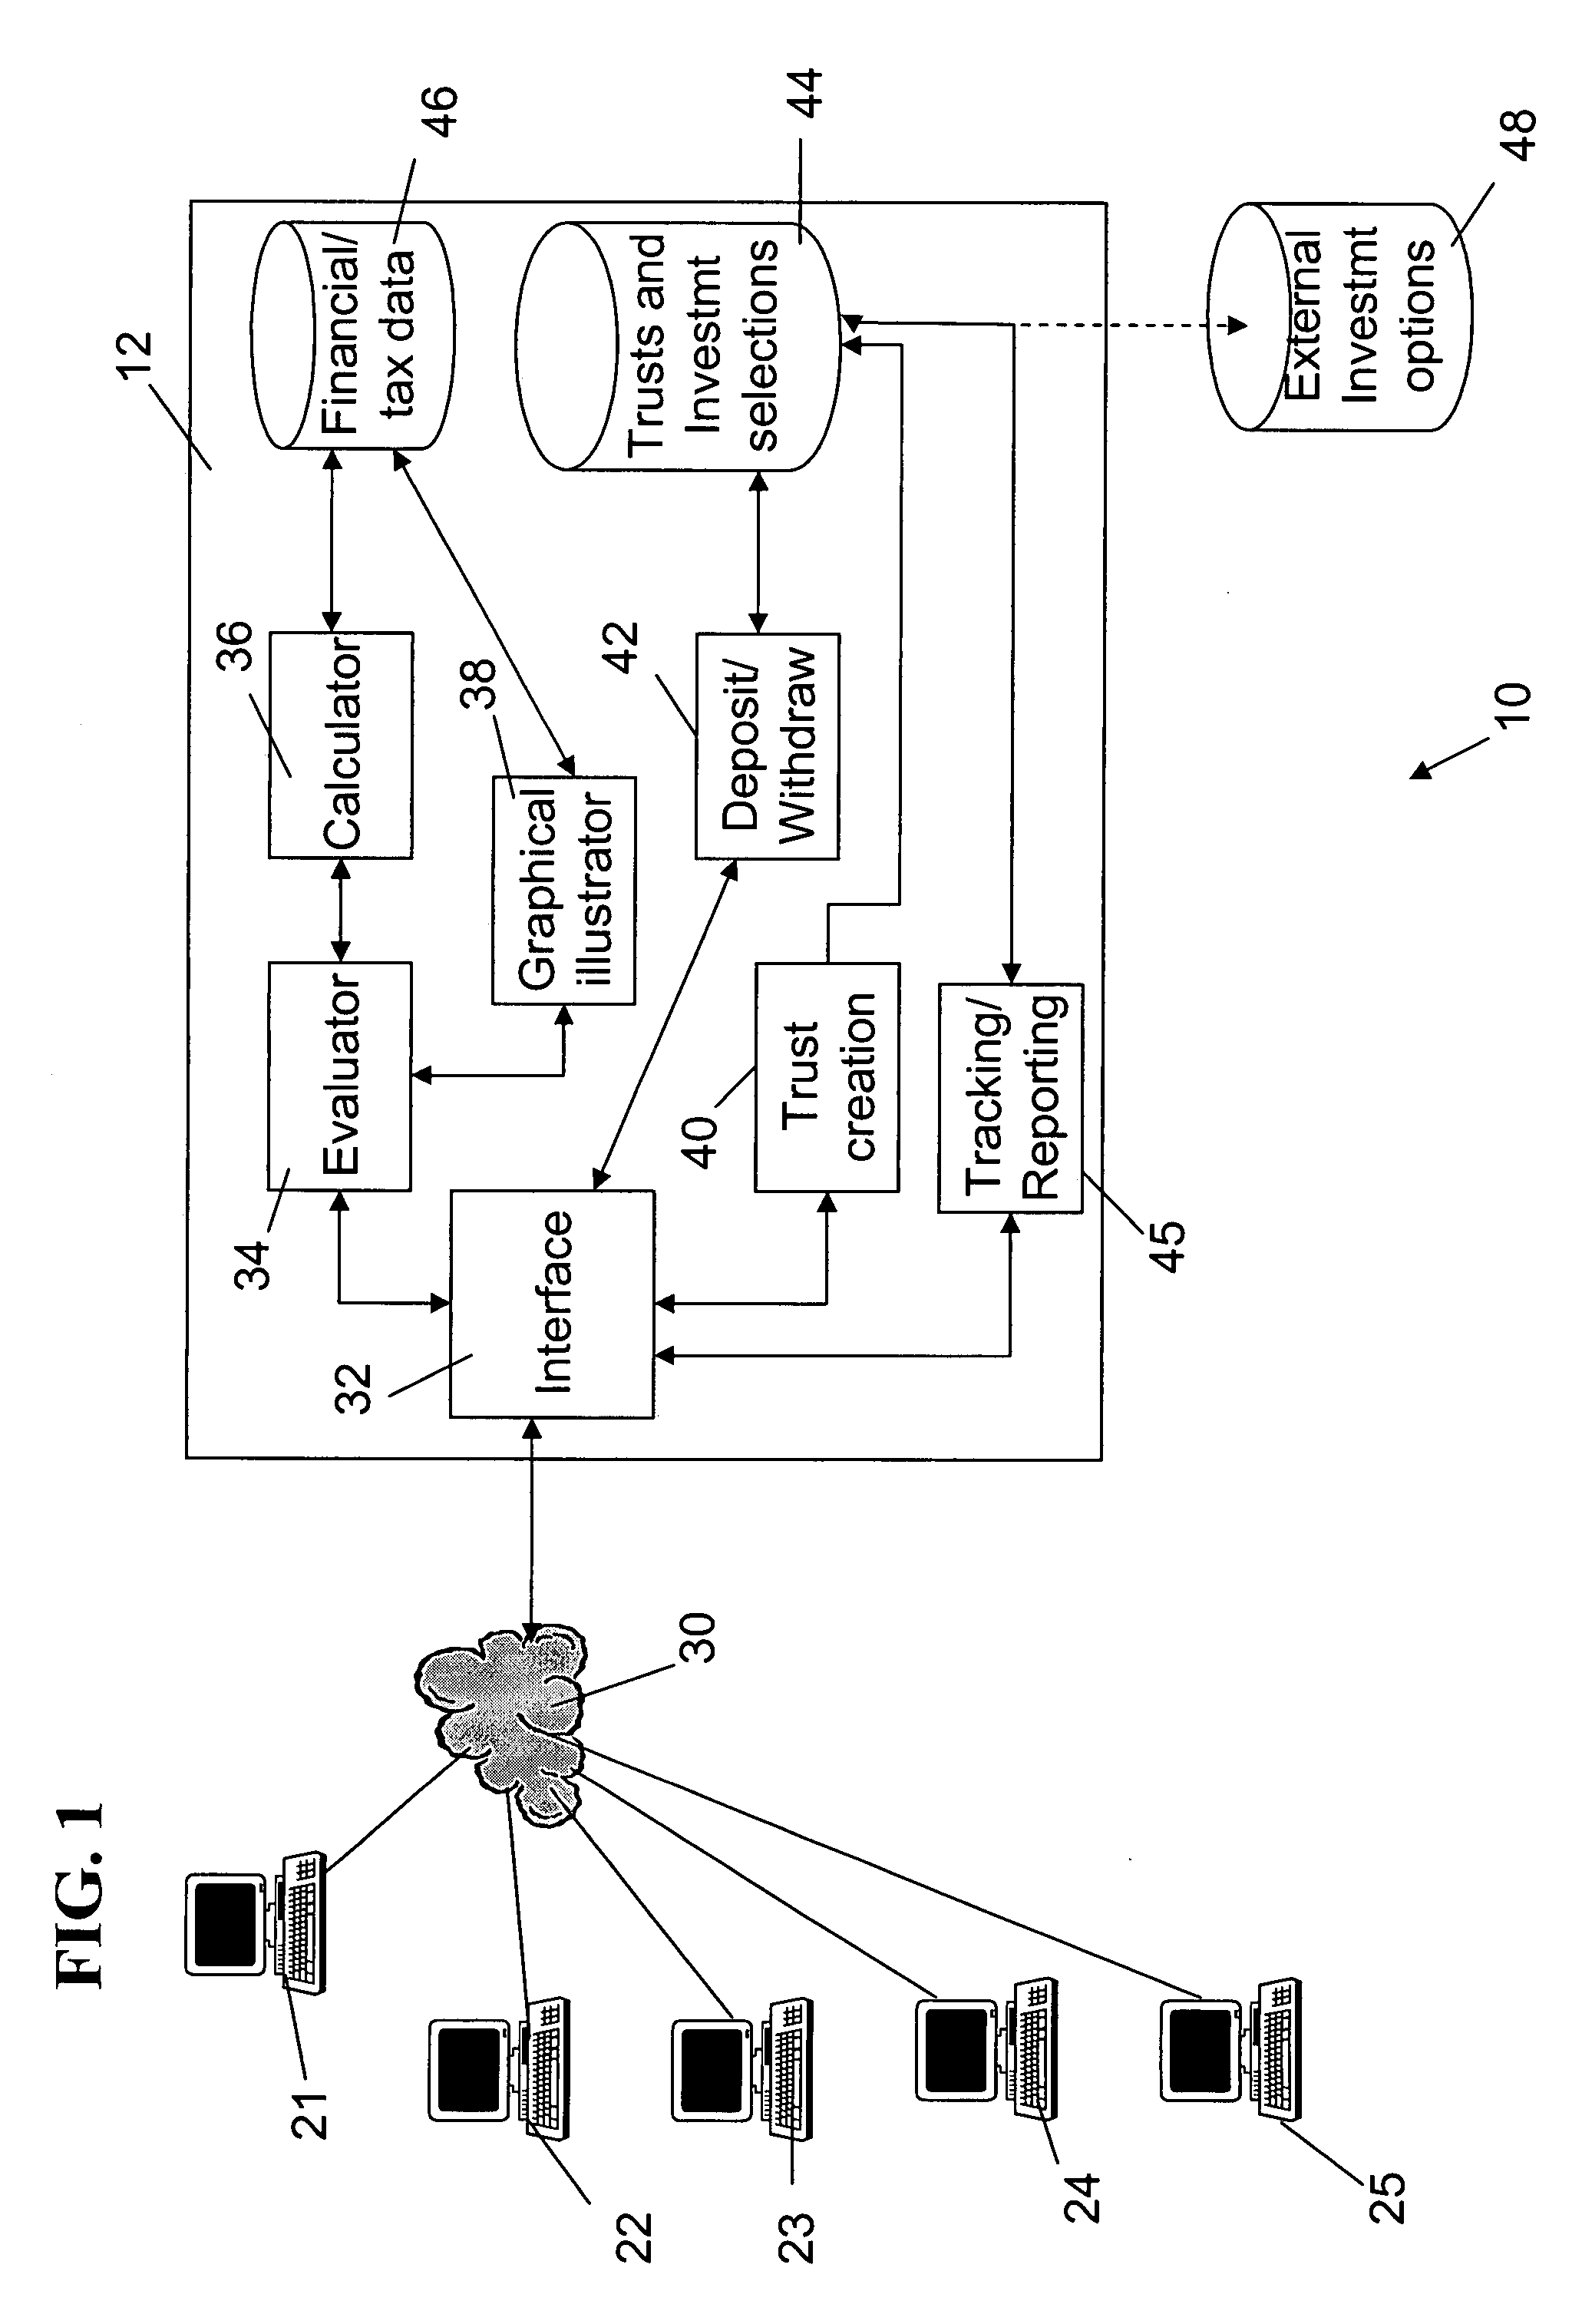 System and method for facilitating the funding and administration of a long term investment or retirement trust